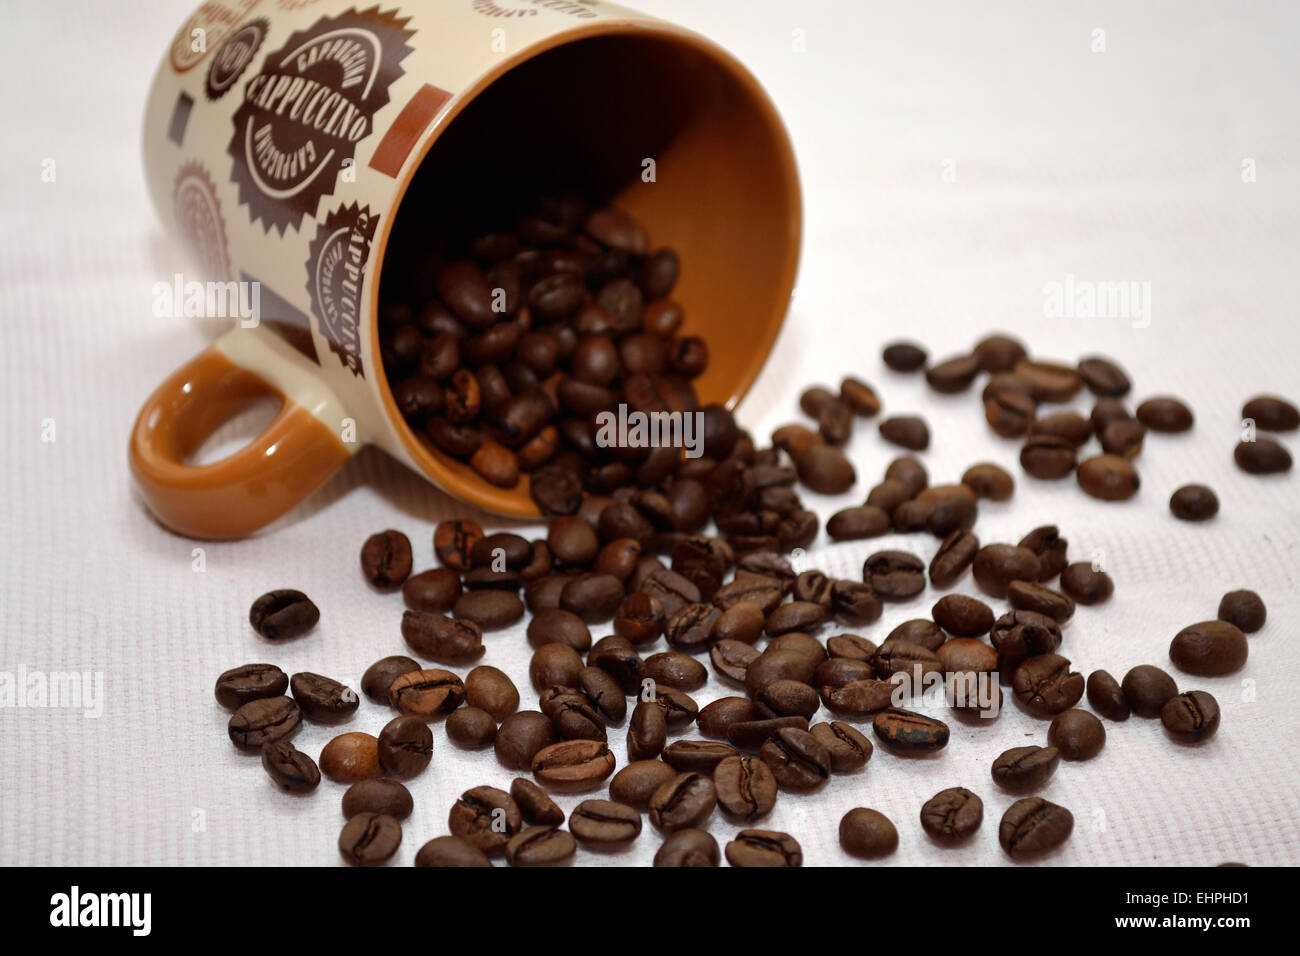 Coffee beans and Mugs Stock Photo